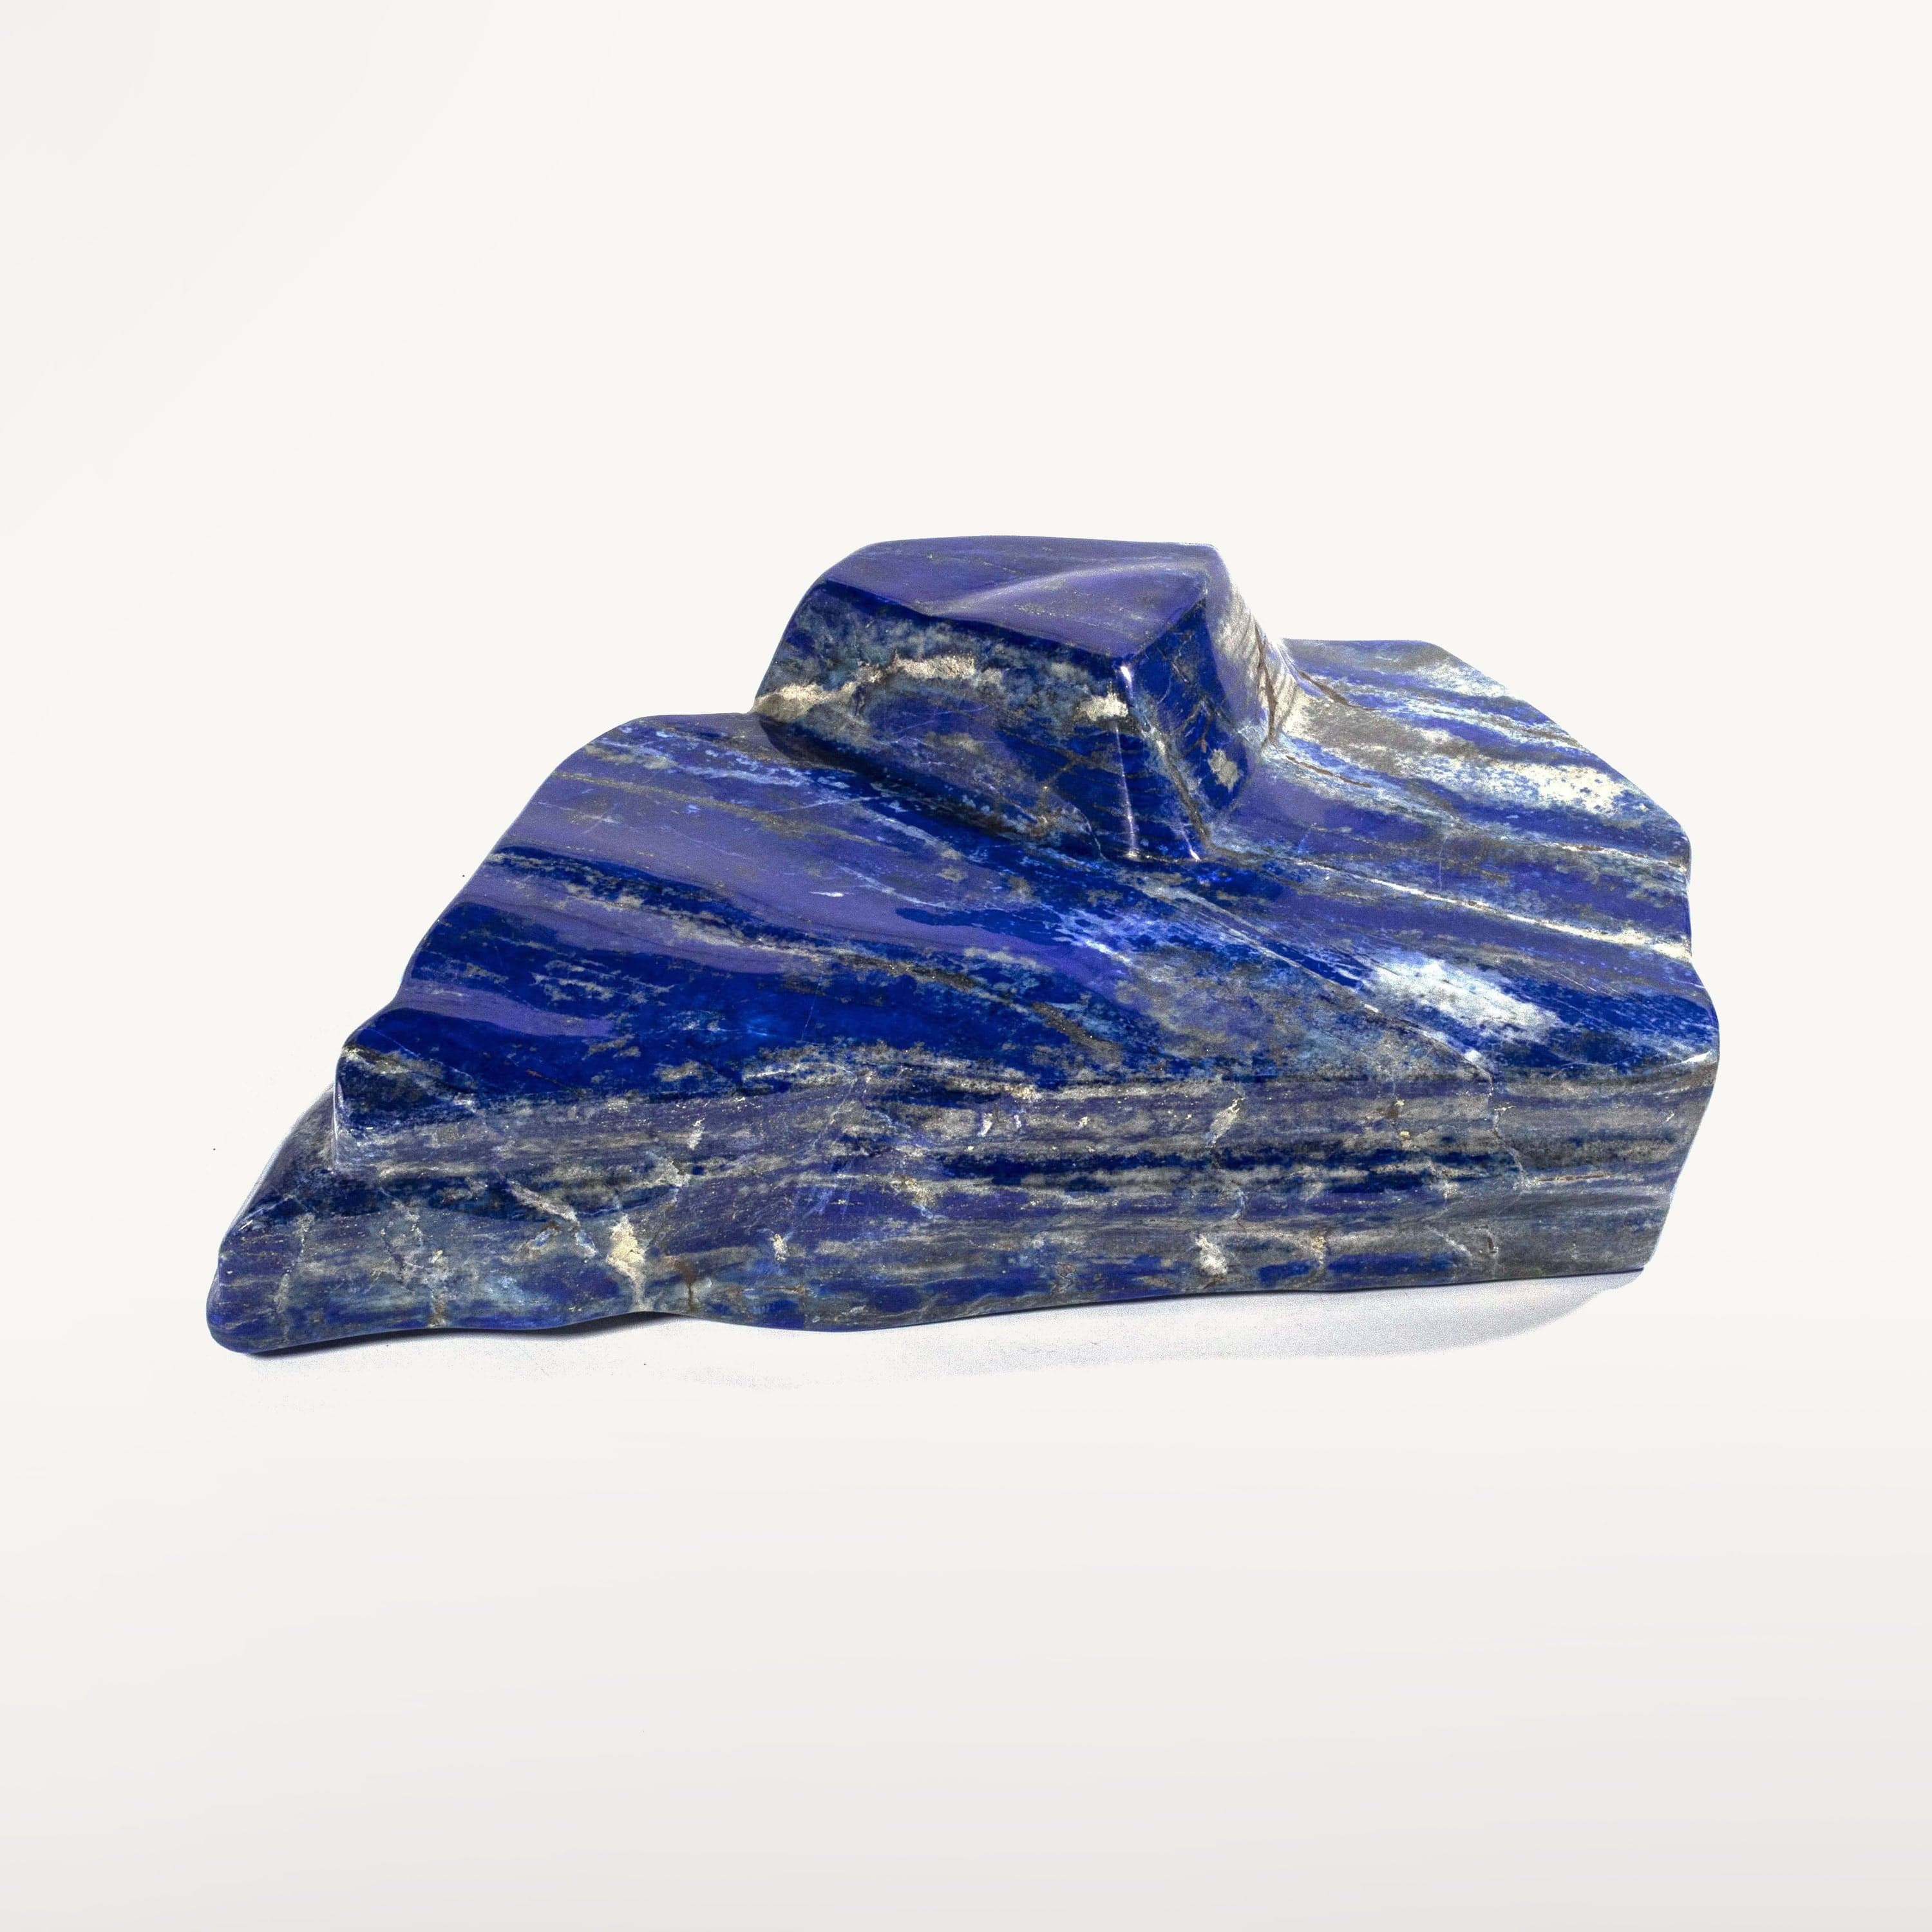 Kalifano Lapis Rare Natural Blue Polished Lapis Lazuli Freeform Carving from Afghanistan - 23.4 kg / 51.6 lbs LPS21000.001